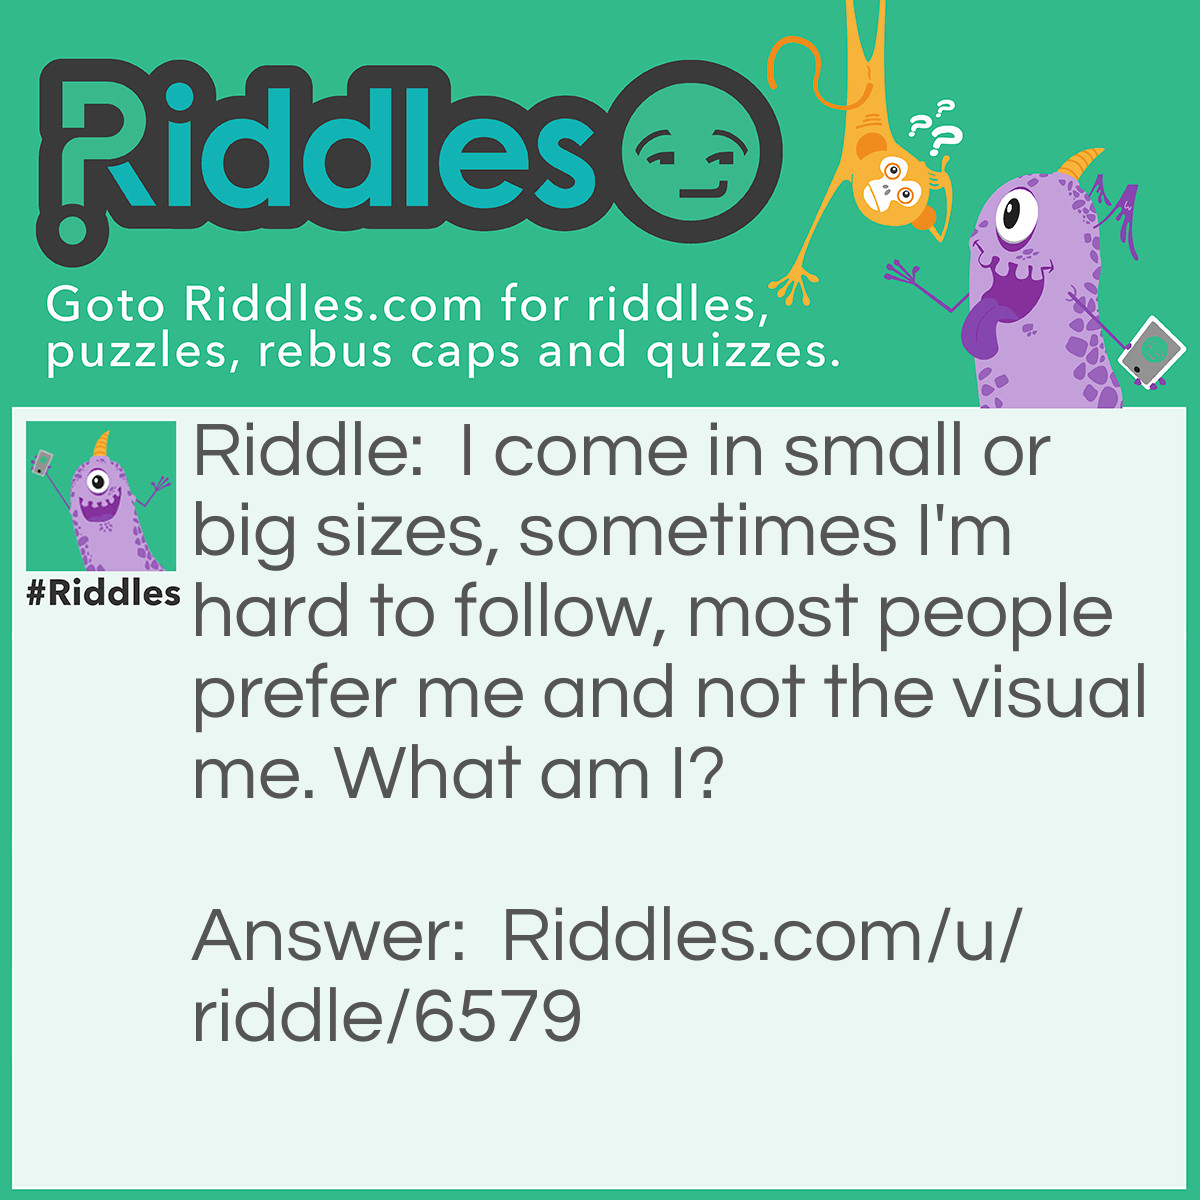 Riddle: I come in small or big sizes, sometimes I'm hard to follow, most people prefer me and not the visual me. What am I? Answer: A book!